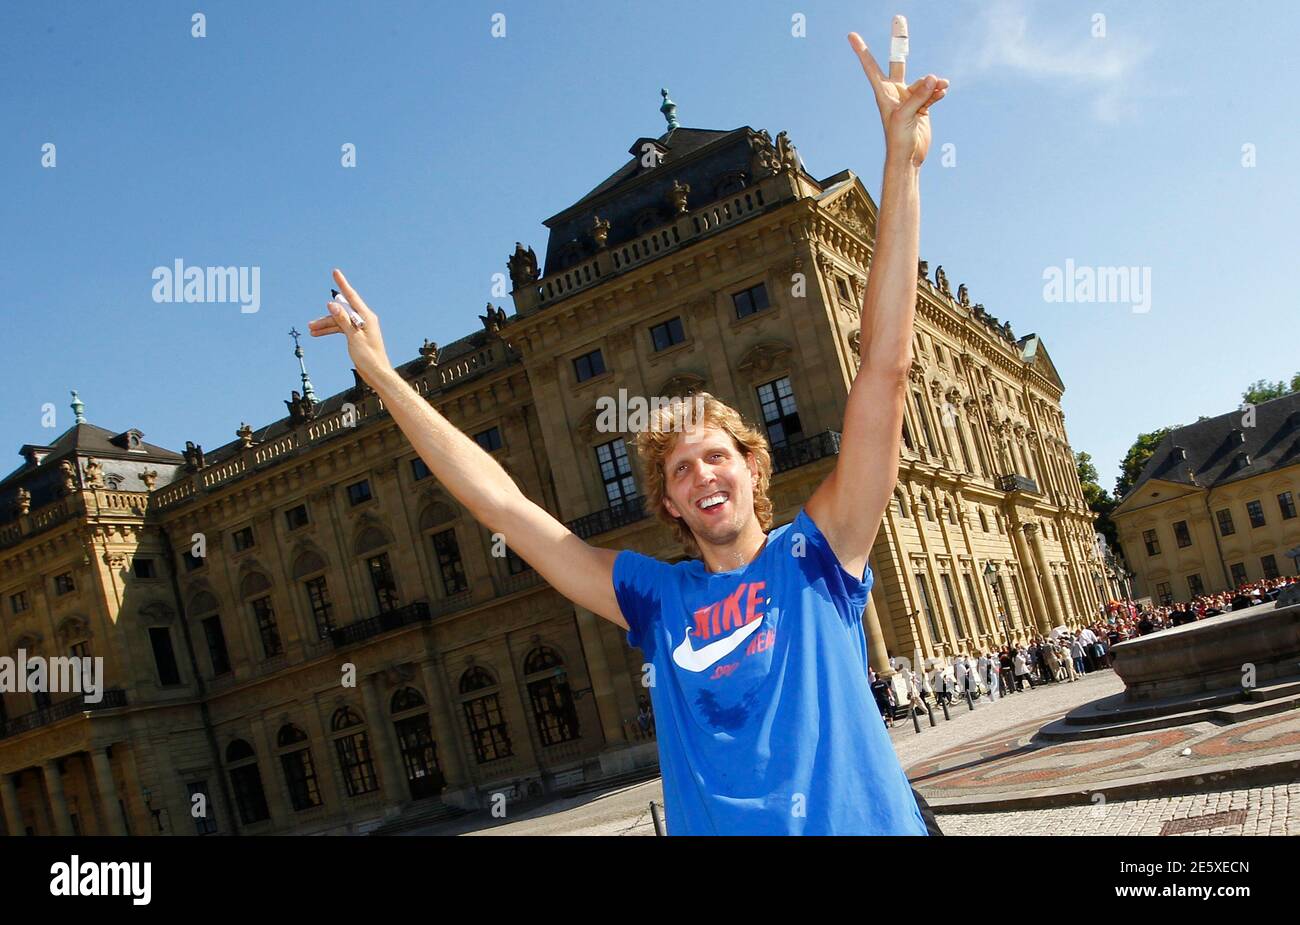 NBA basketball player Dirk Nowitzki waves to waiting fans as he arrives in front of the Wuerzburg Residenz during a visit to his German home town of Wuerzburg, June 28, 2011. Nowitzki became the first German to win an NBA title when his basketball team Dallas Mavericks beat the Miami Heat last weeki, giving the Mavericks their first championship in their 31 year history. Nowitzki was also named the Most Valuable Player of the Championship series.          REUTERS/Kai Pfaffenbach (GERMANY  - Tags: SPORT BASKETBALL) Stock Photo